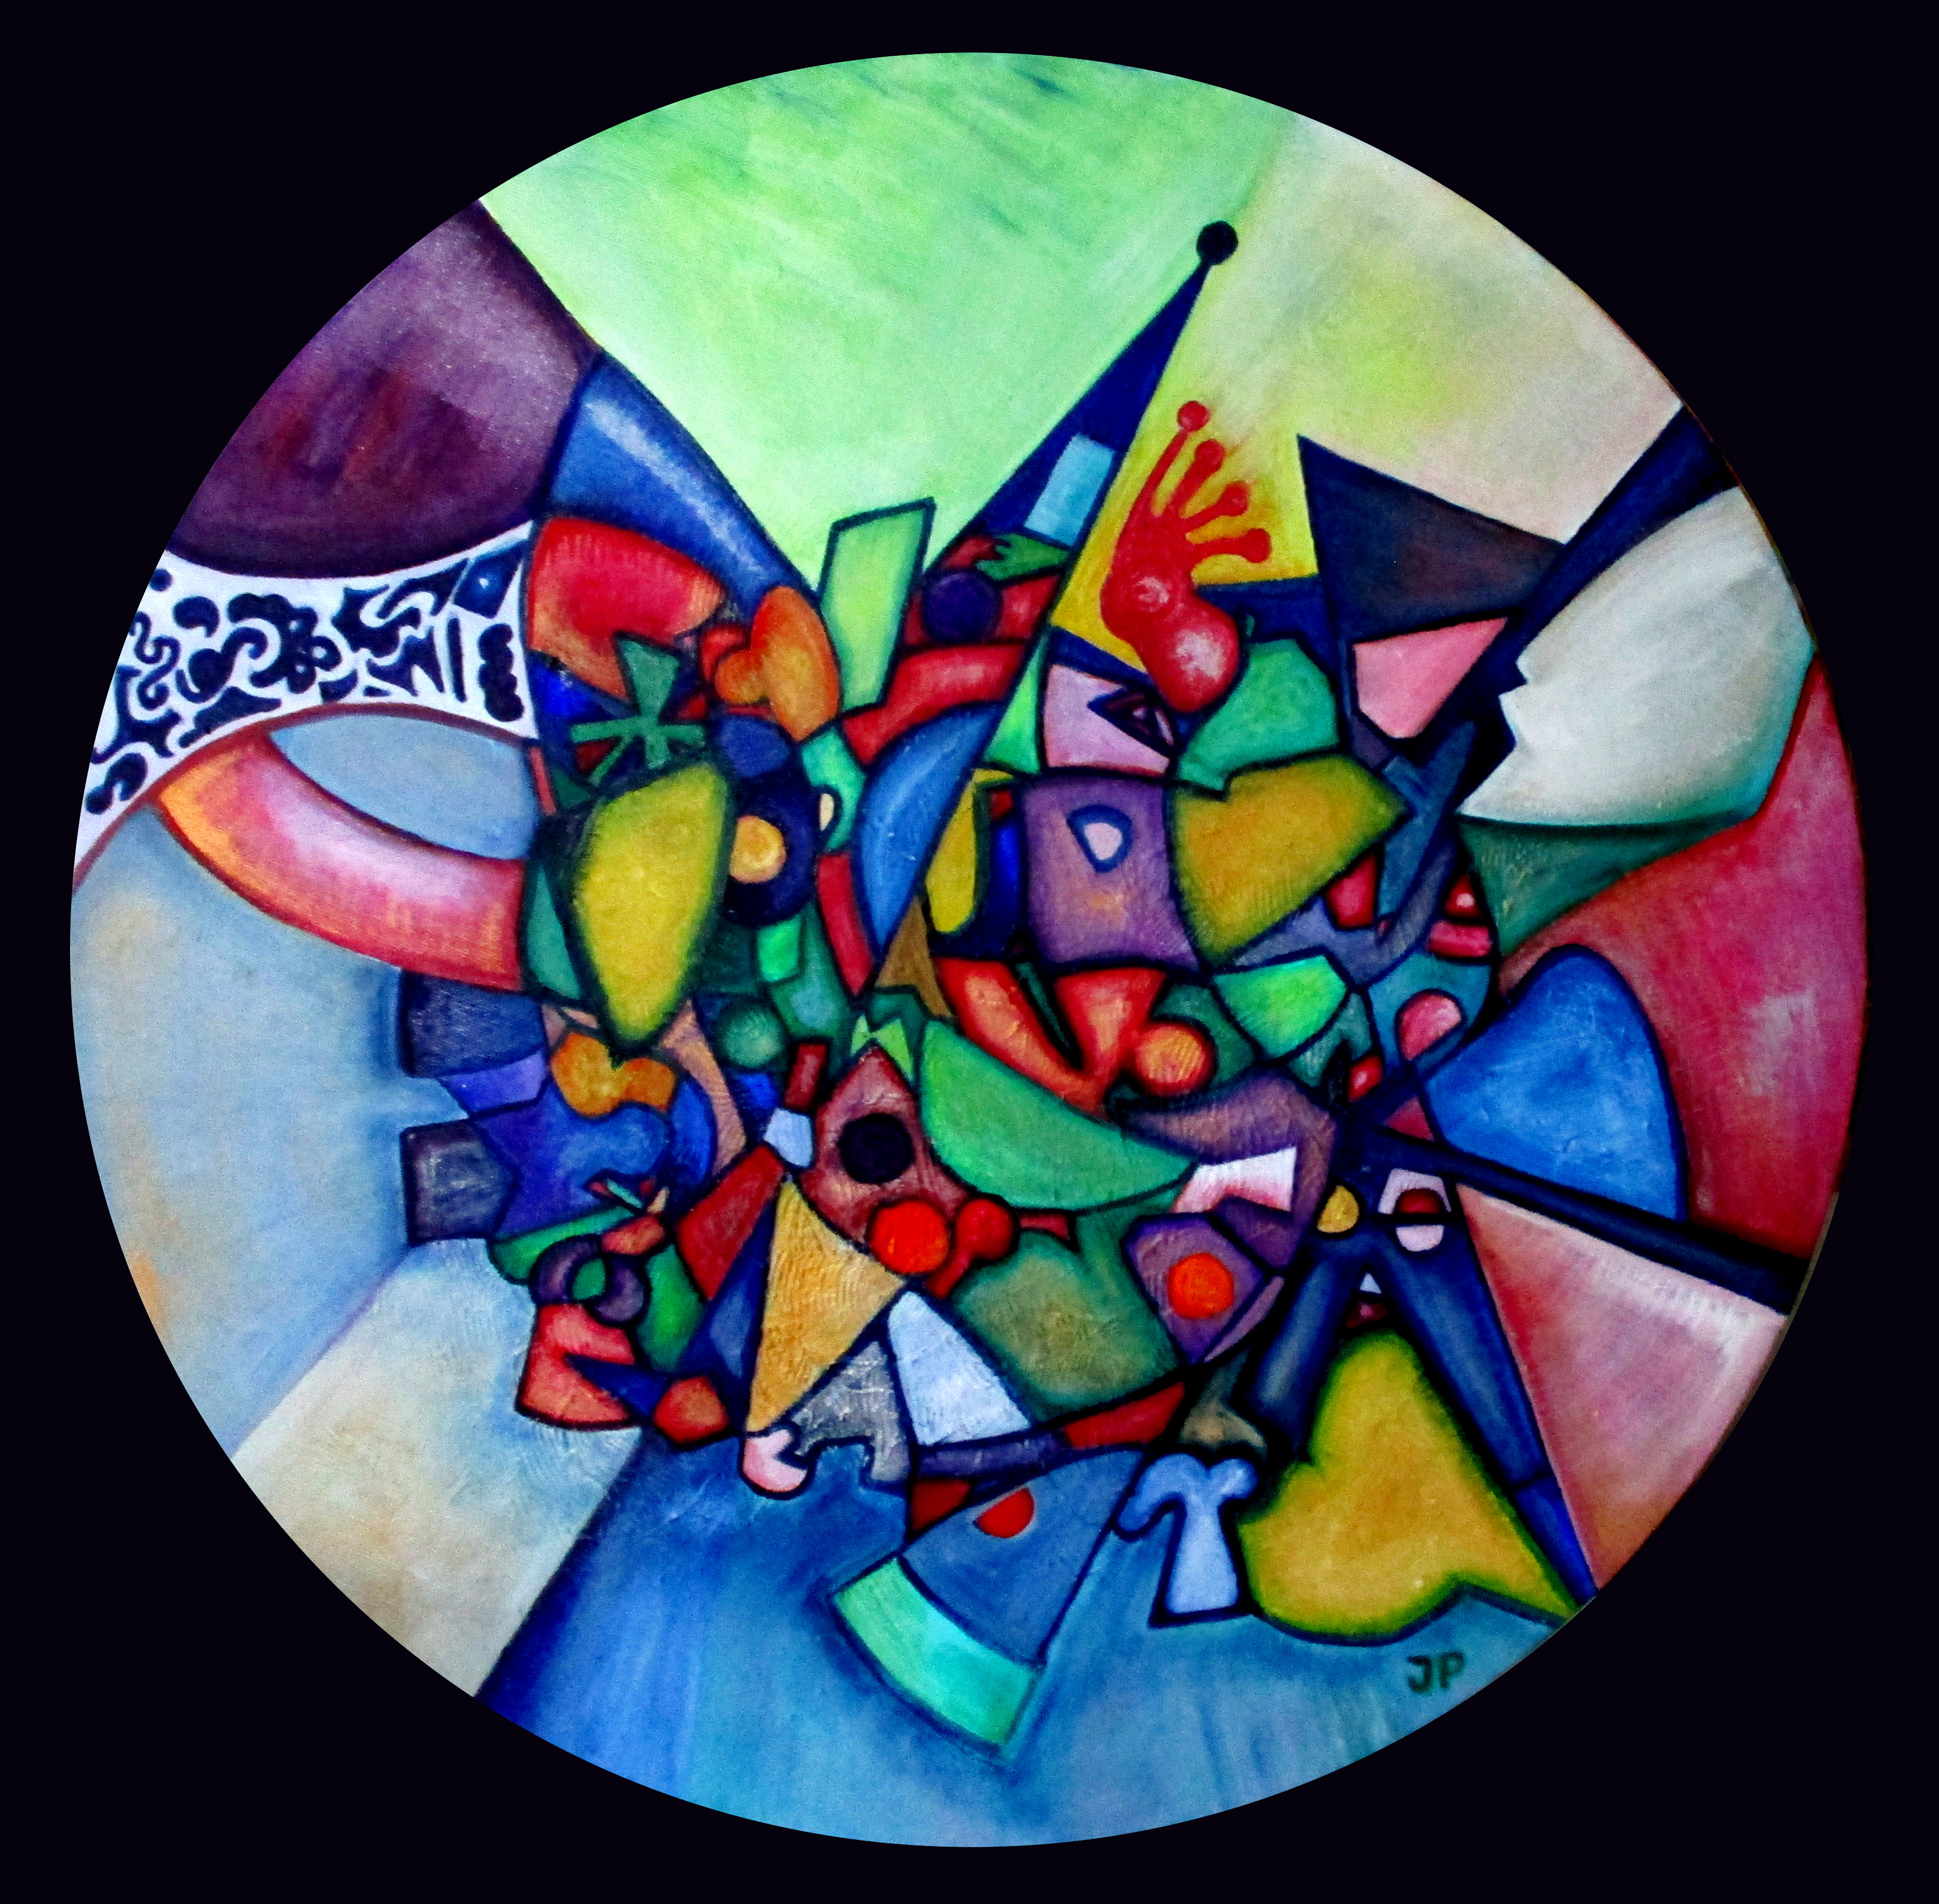 A round abstract oil painting, segmented and multicoloured radiating from the center